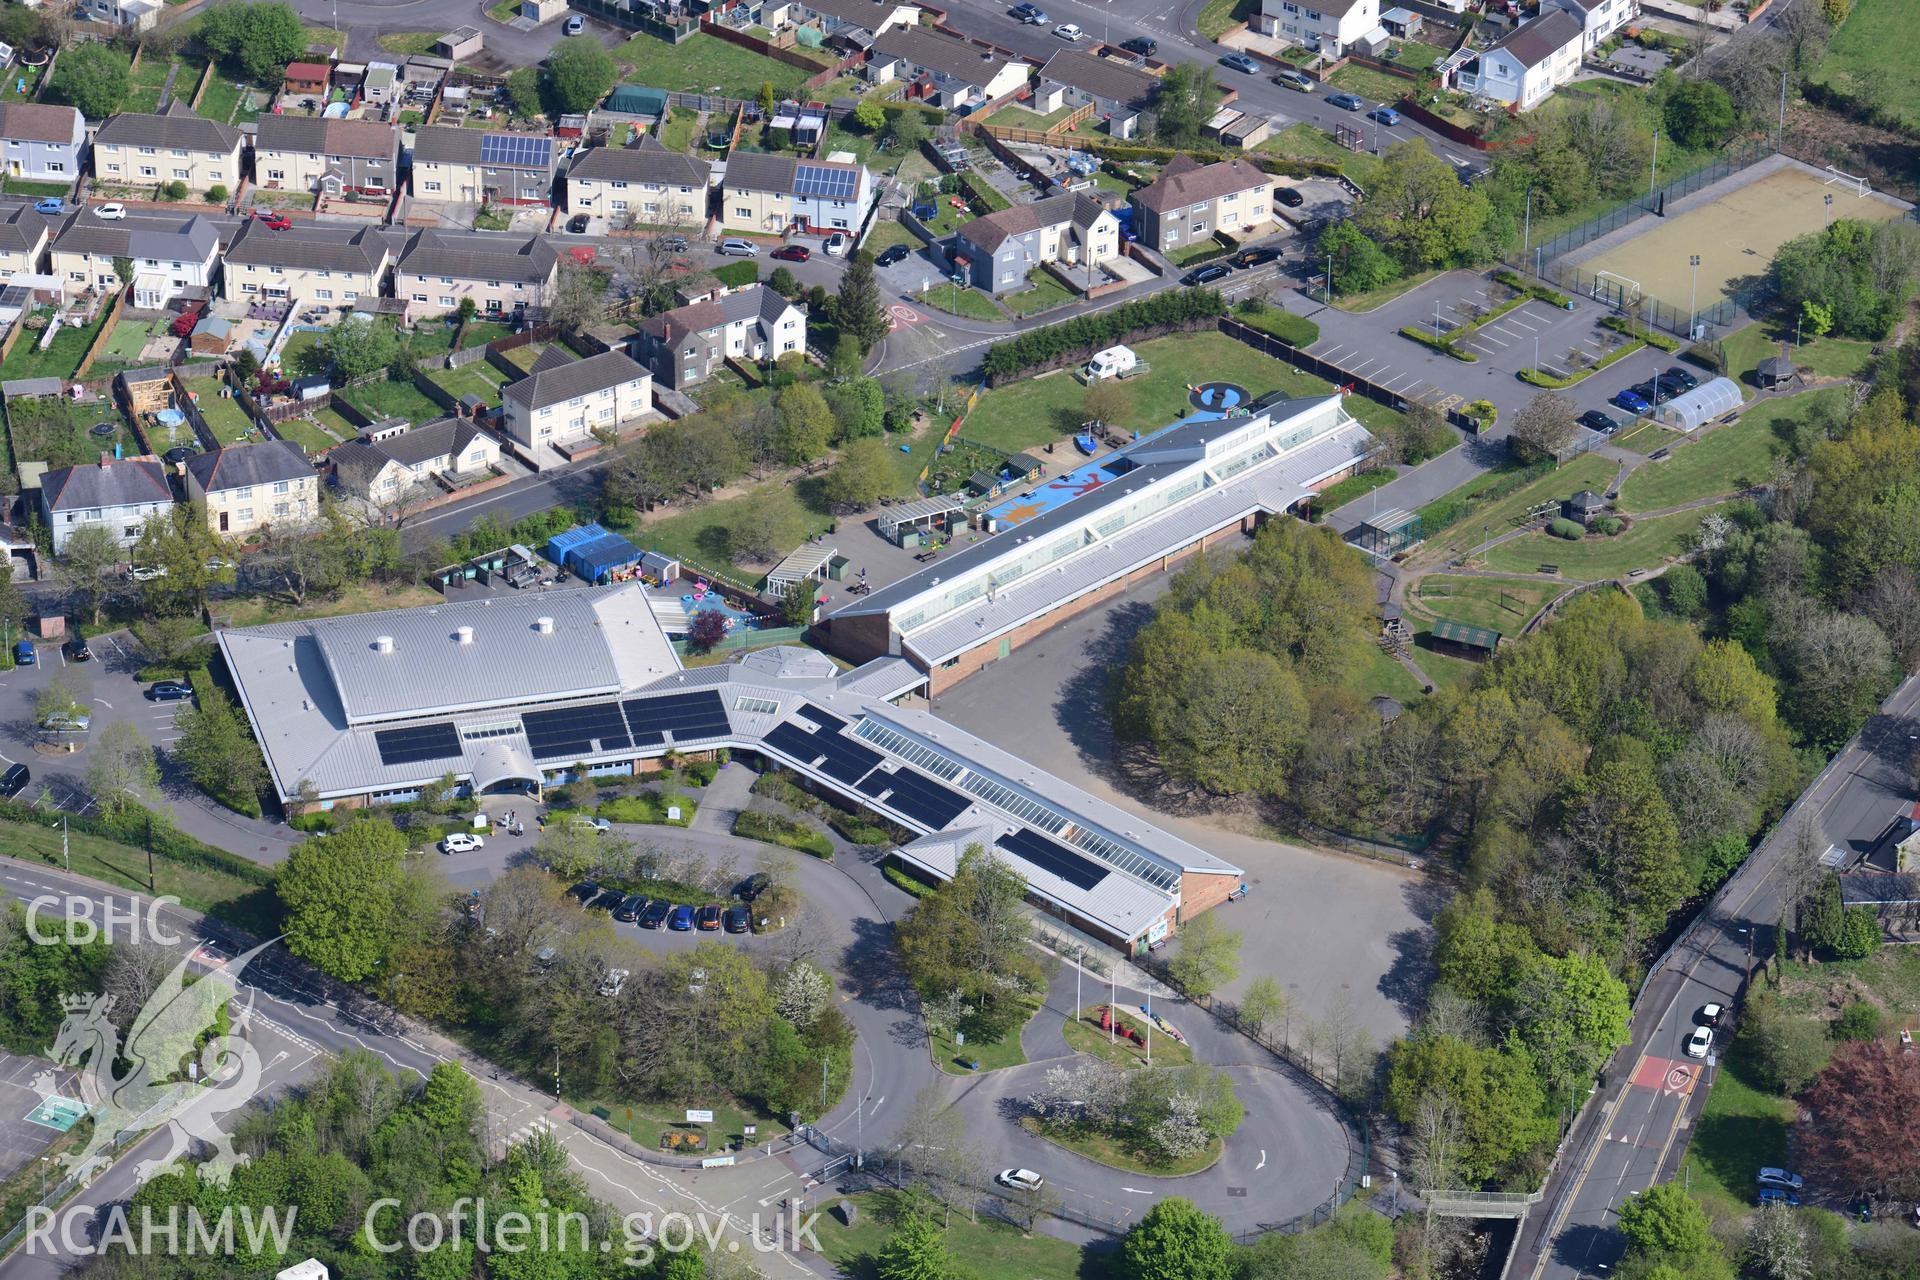 Garnant School, Cwmamman. Oblique aerial photograph taken during the Royal Commission's programme of archaeological aerial reconnaissance by Toby Driver on 29 April 2022.